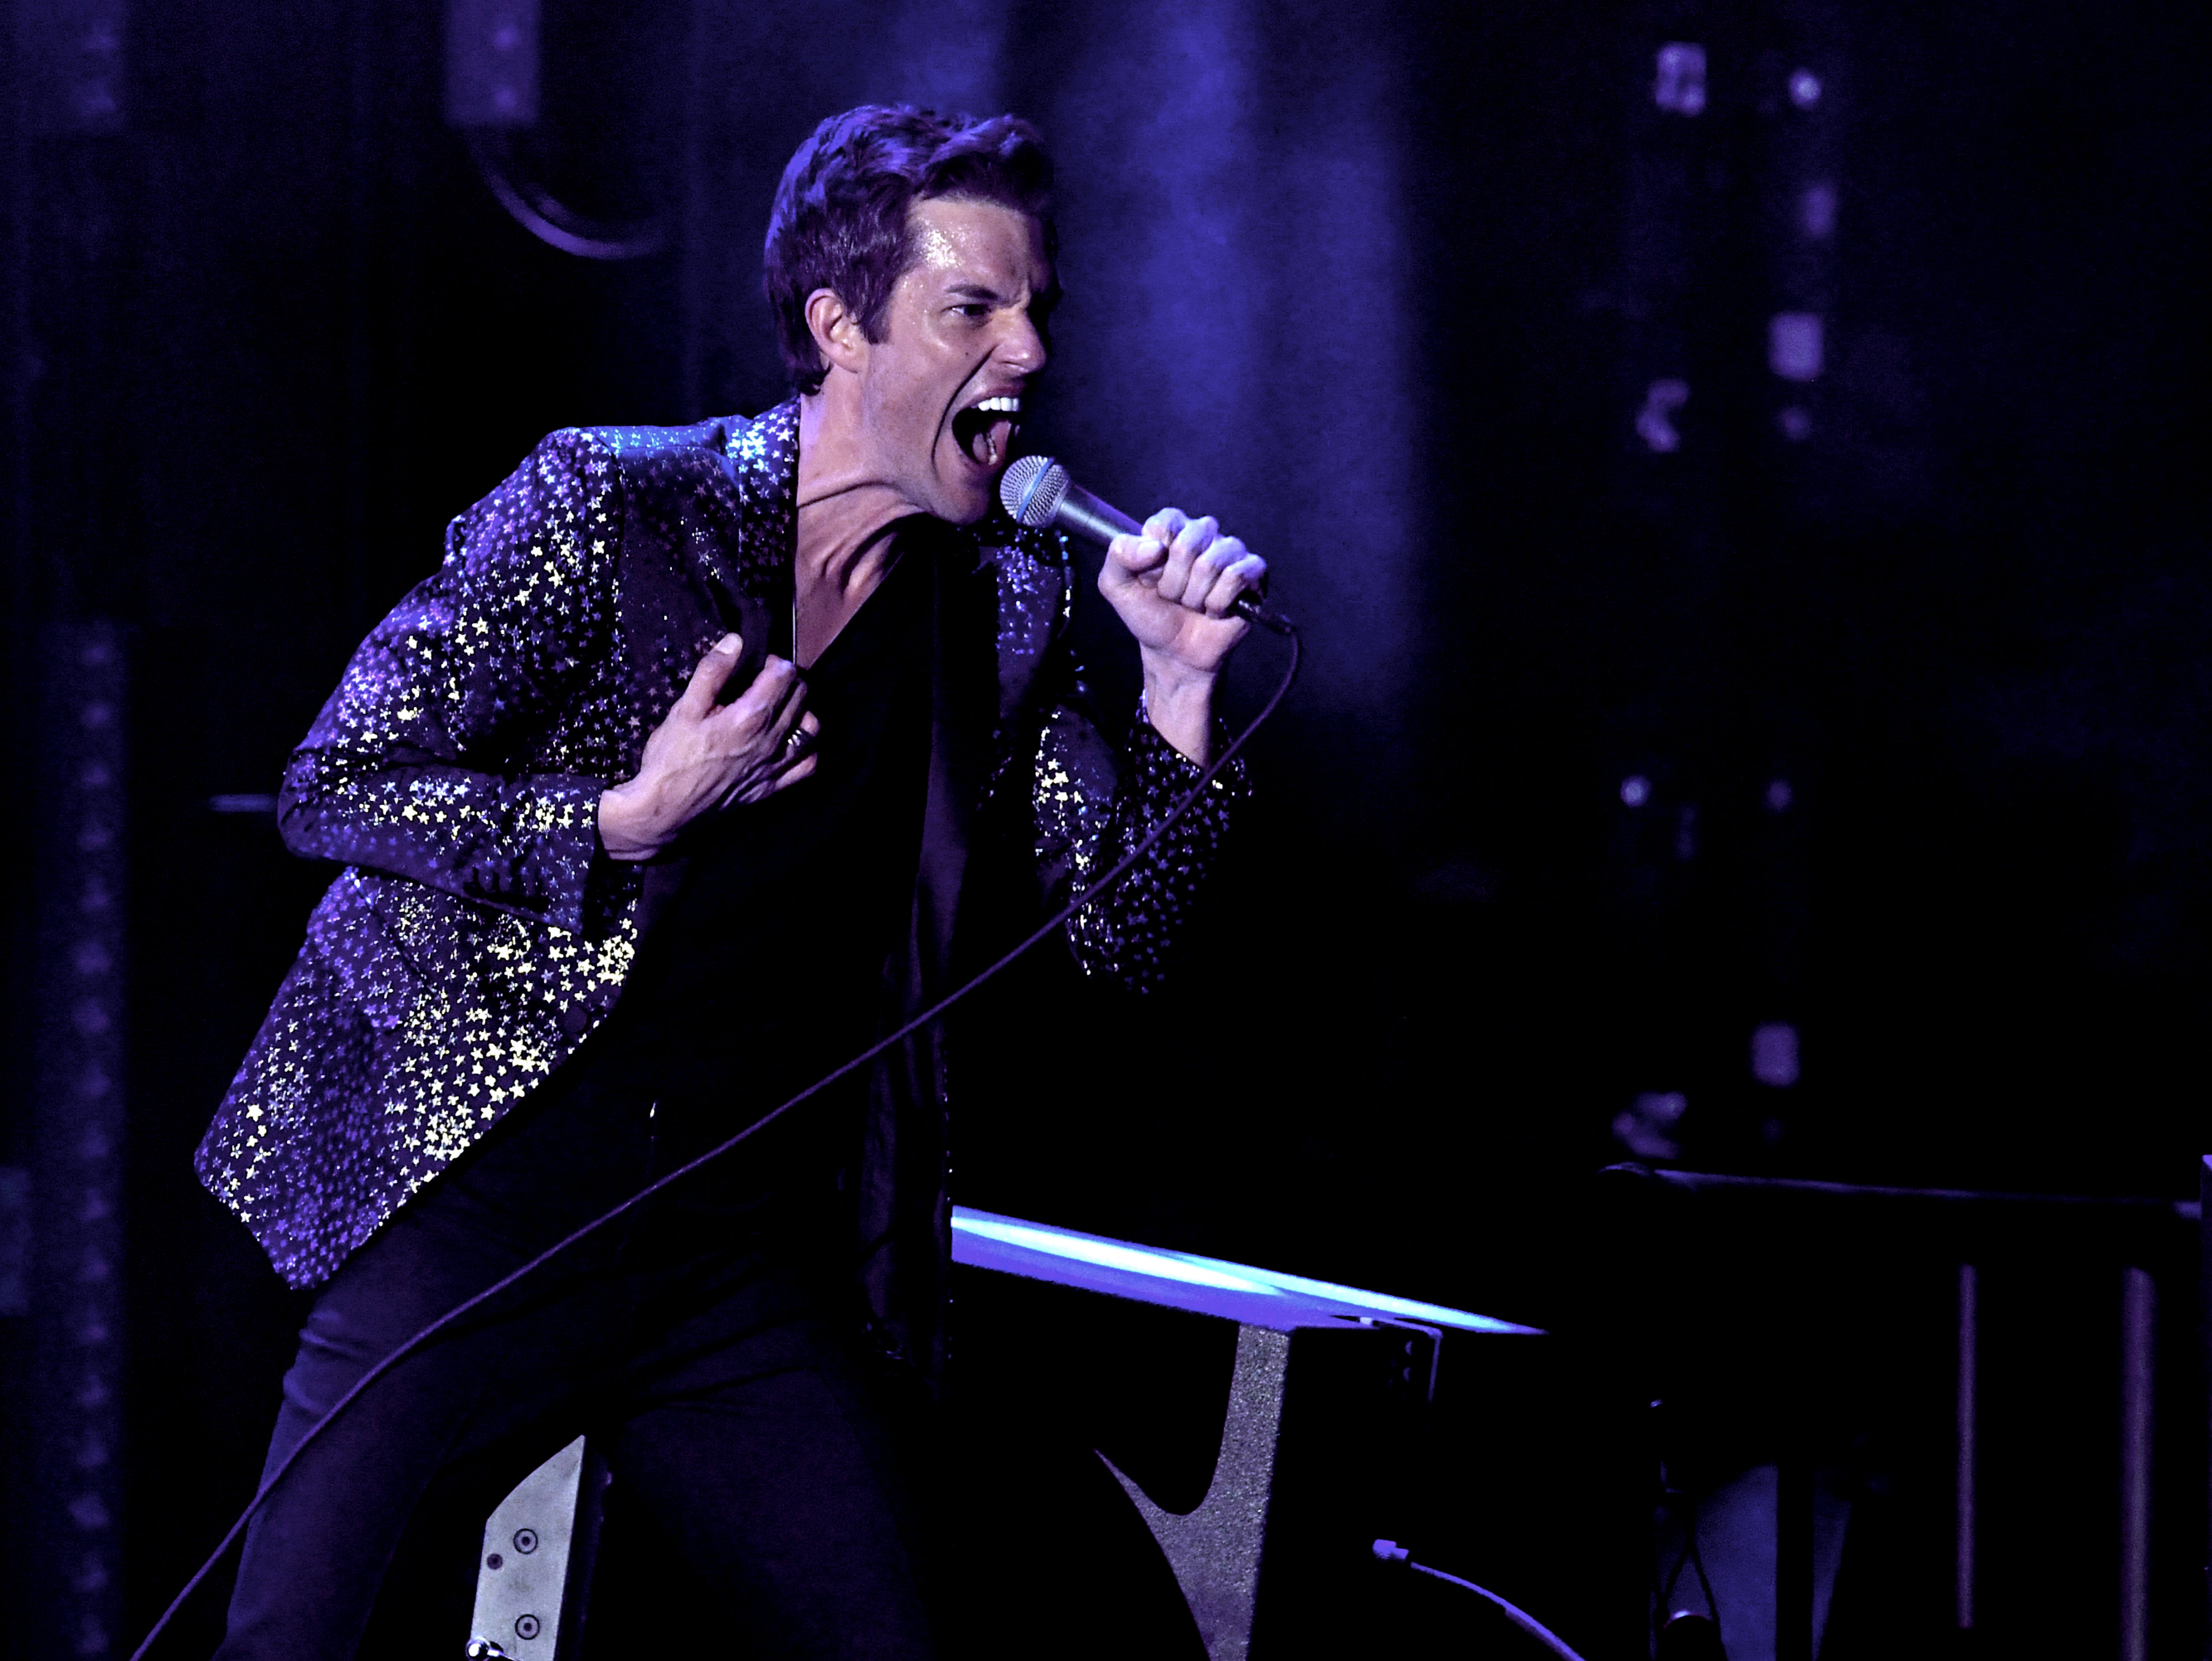 The Killers’ frontman Brandon Flowers says he no longer feels like the song belongs to the band